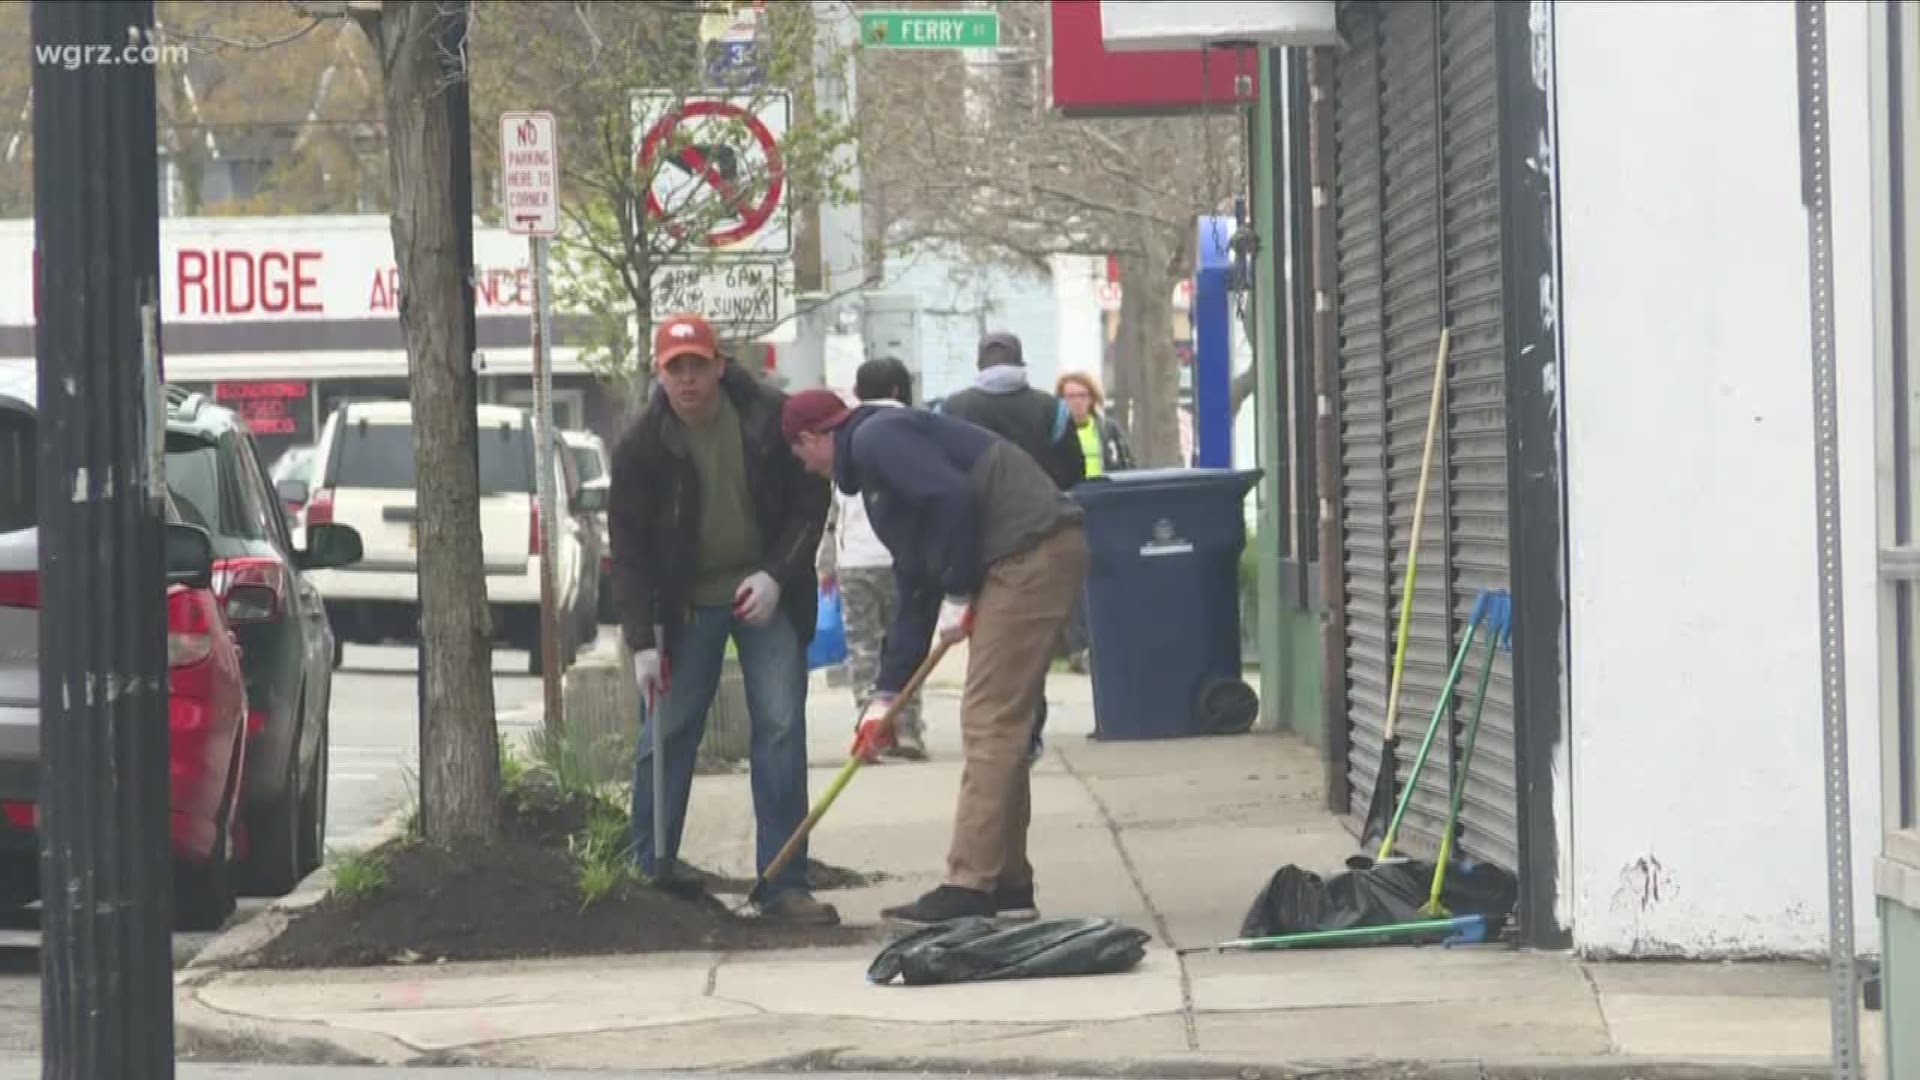 For two hours, volunteers picked up garbage that had built up during the winter along Grant Street and surrounding neighborhoods.